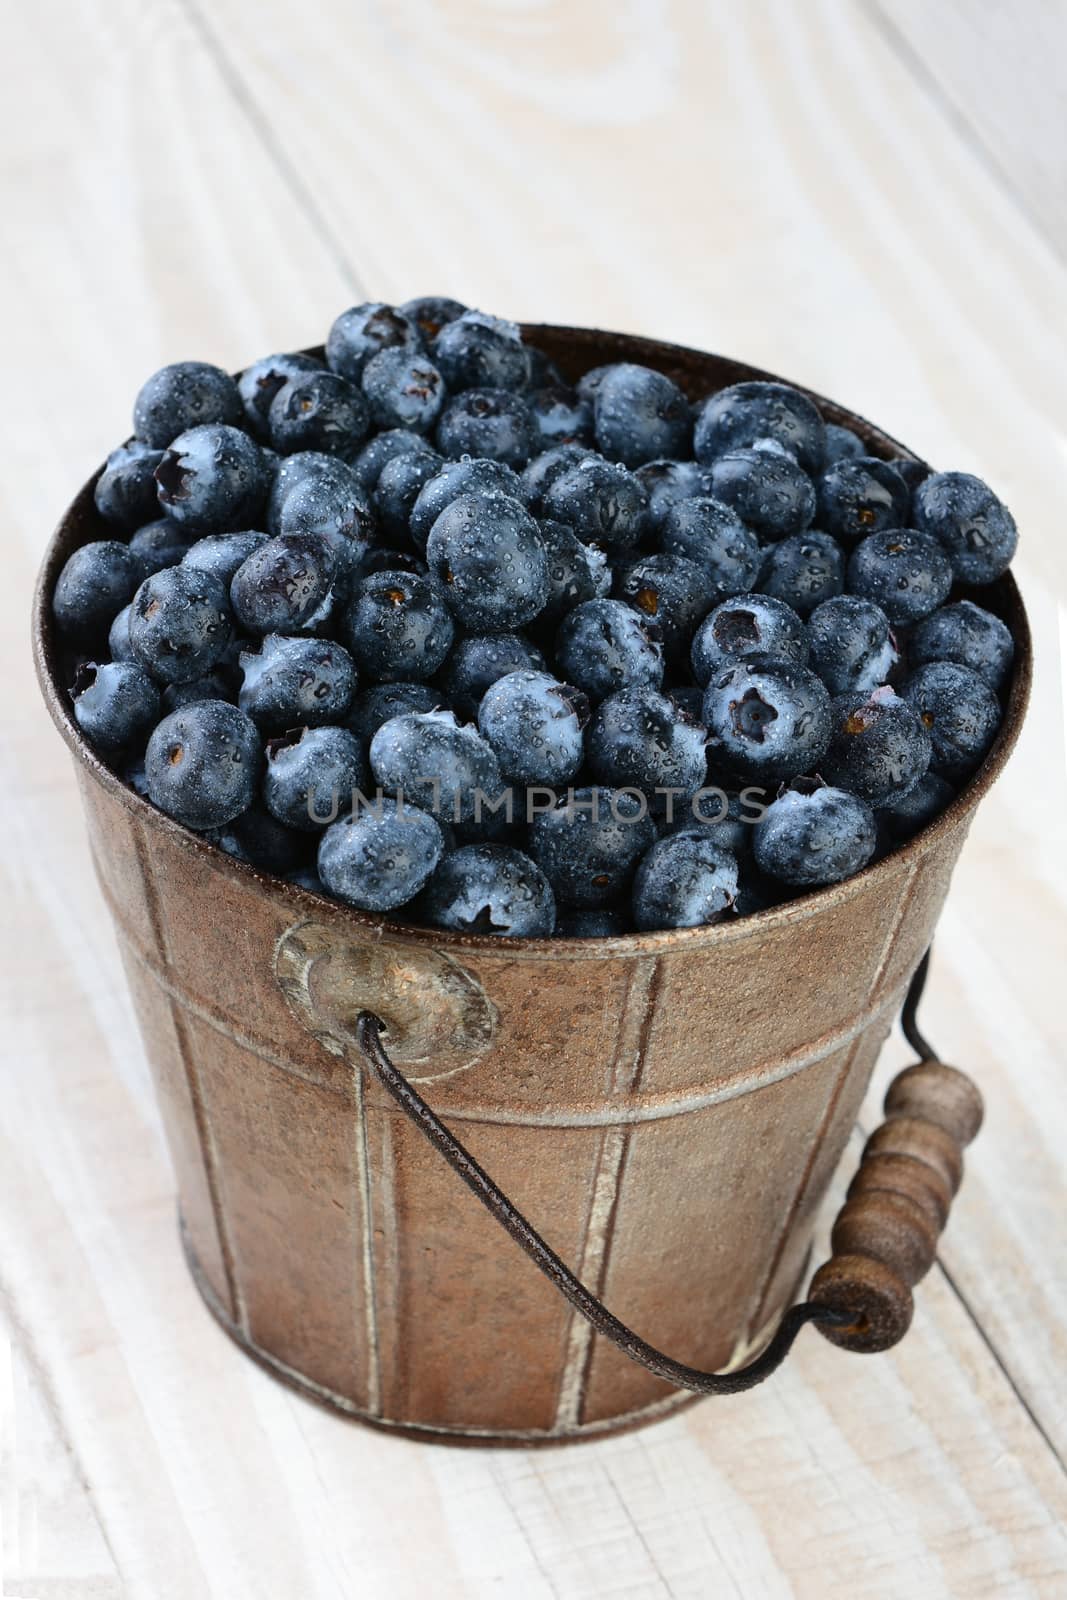 Closeup of a bucket of blueberries on a rustic farmhouse style table. Vertical format shot from a high angle with shallow depth of field. The fresh picked berries are covered with a mist.